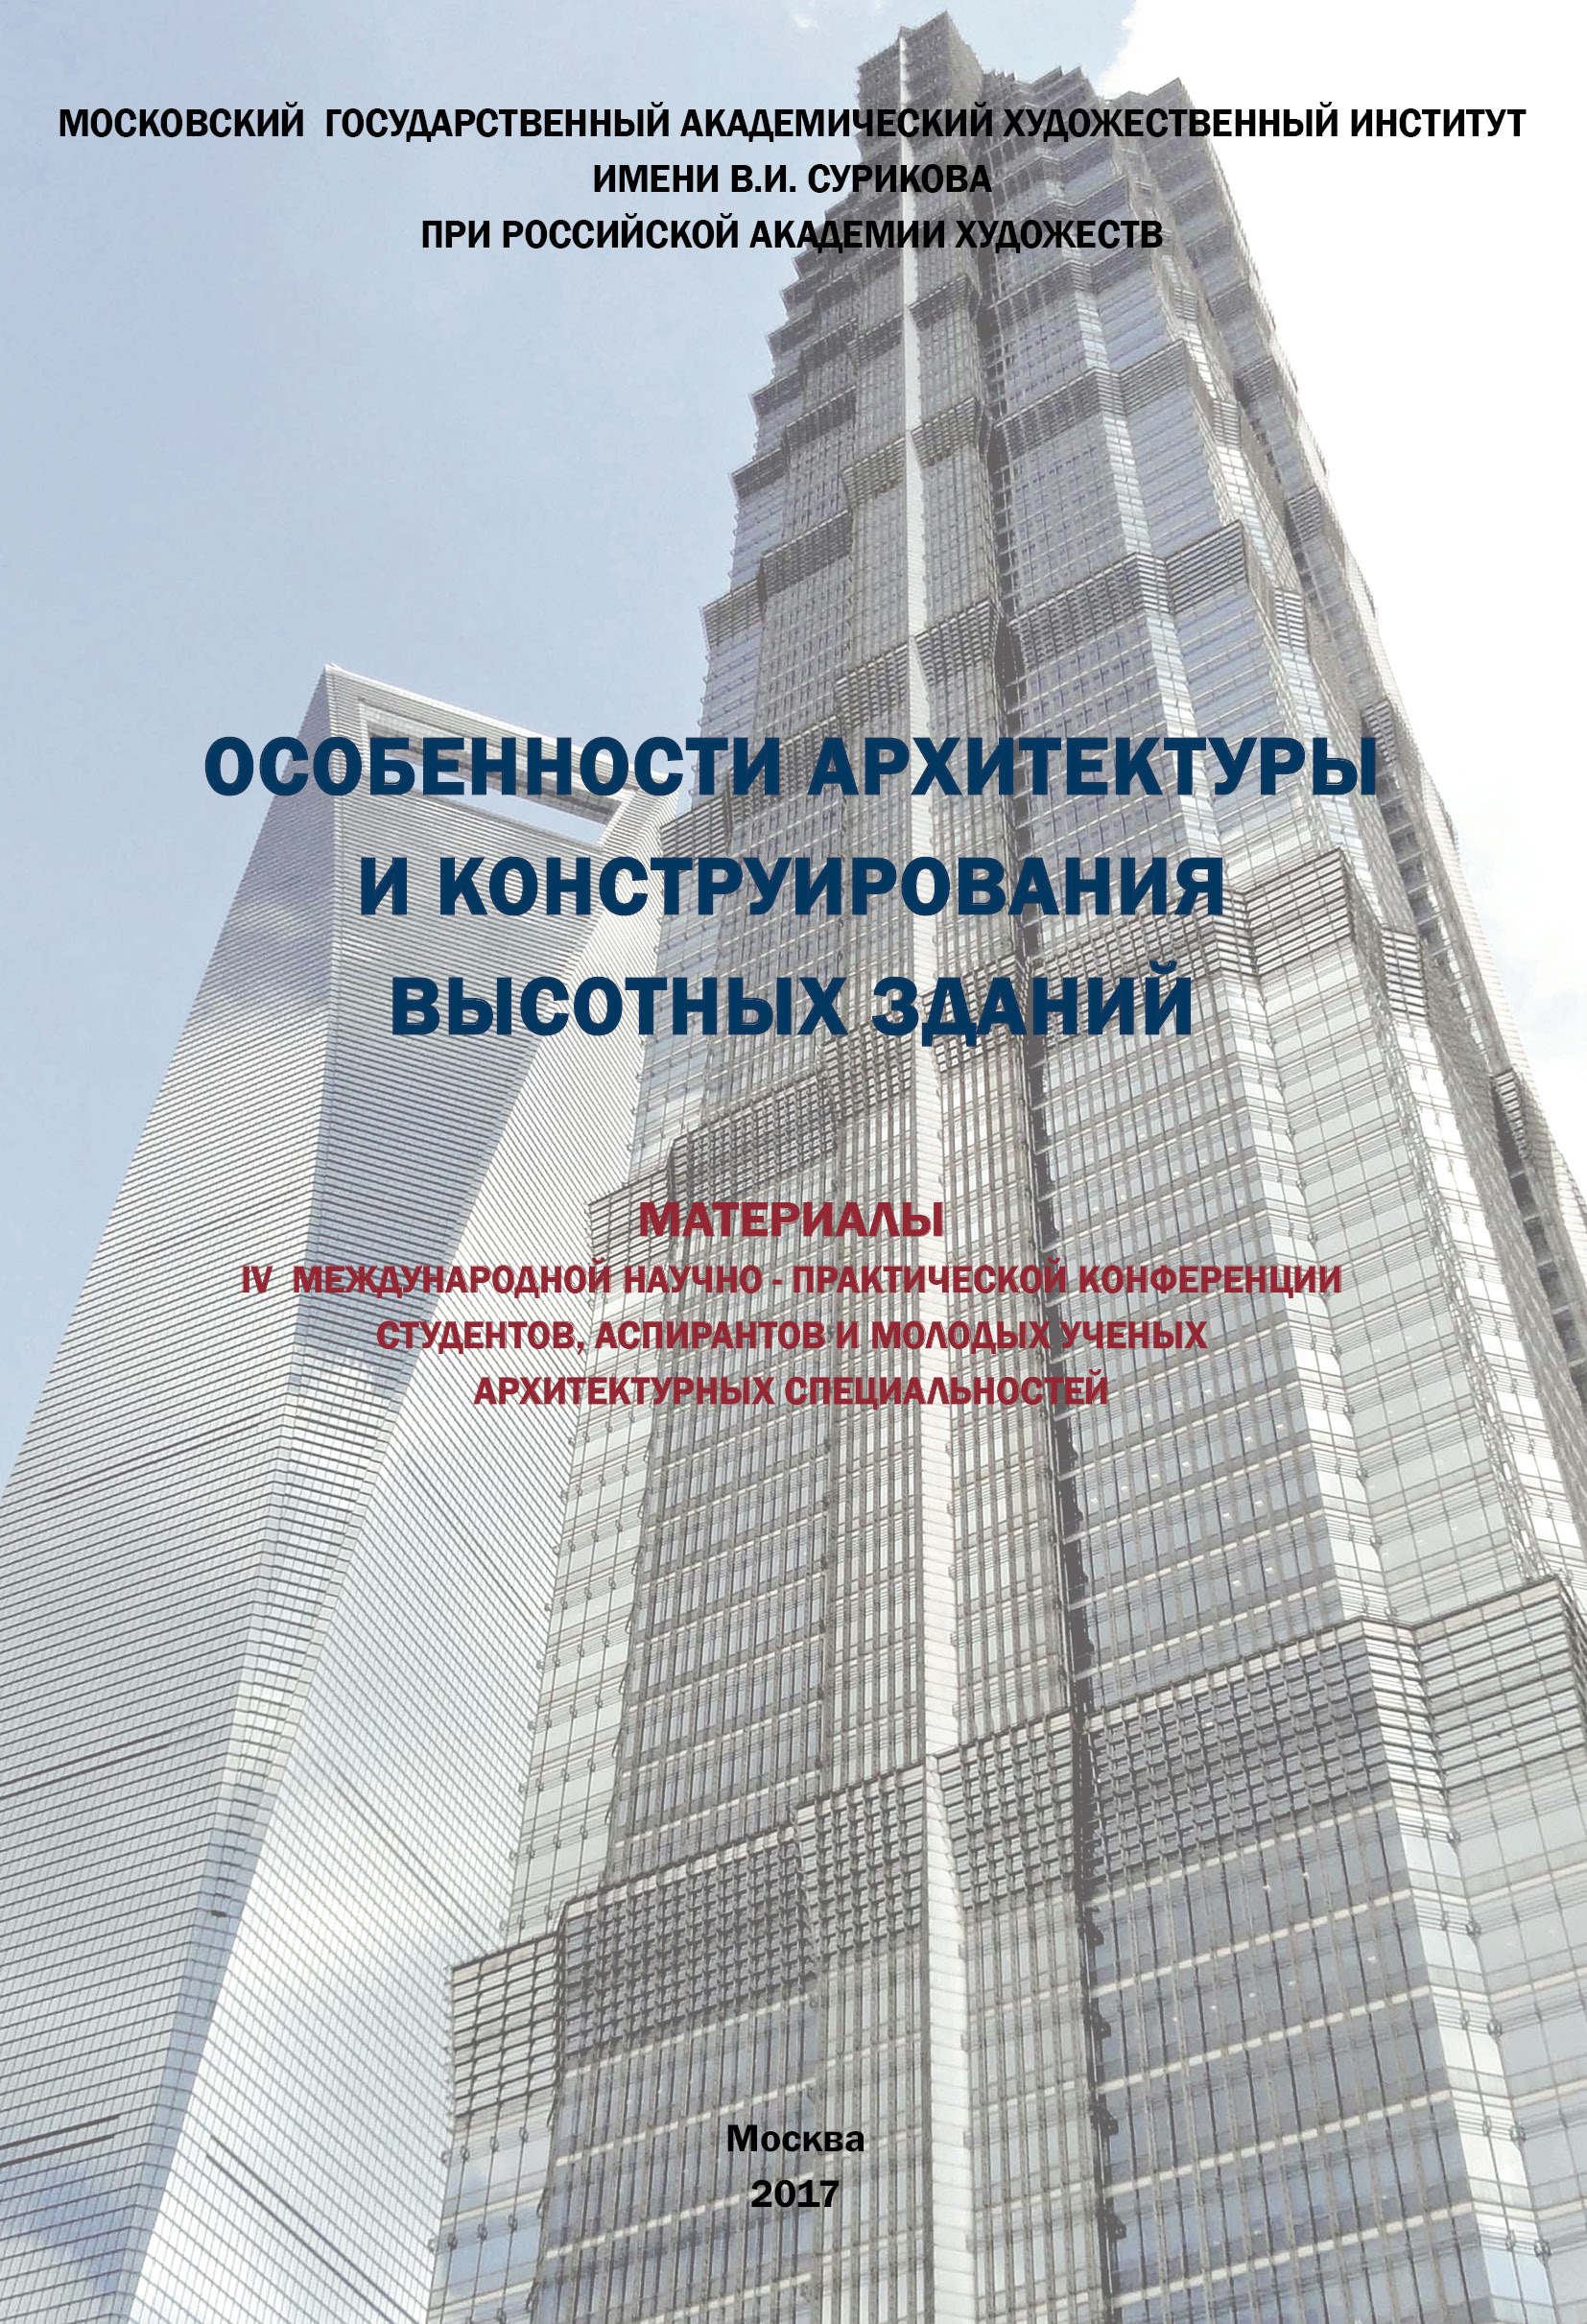                         THE SEISMIC RESISTANCE OF TALL BUILDINGS
            